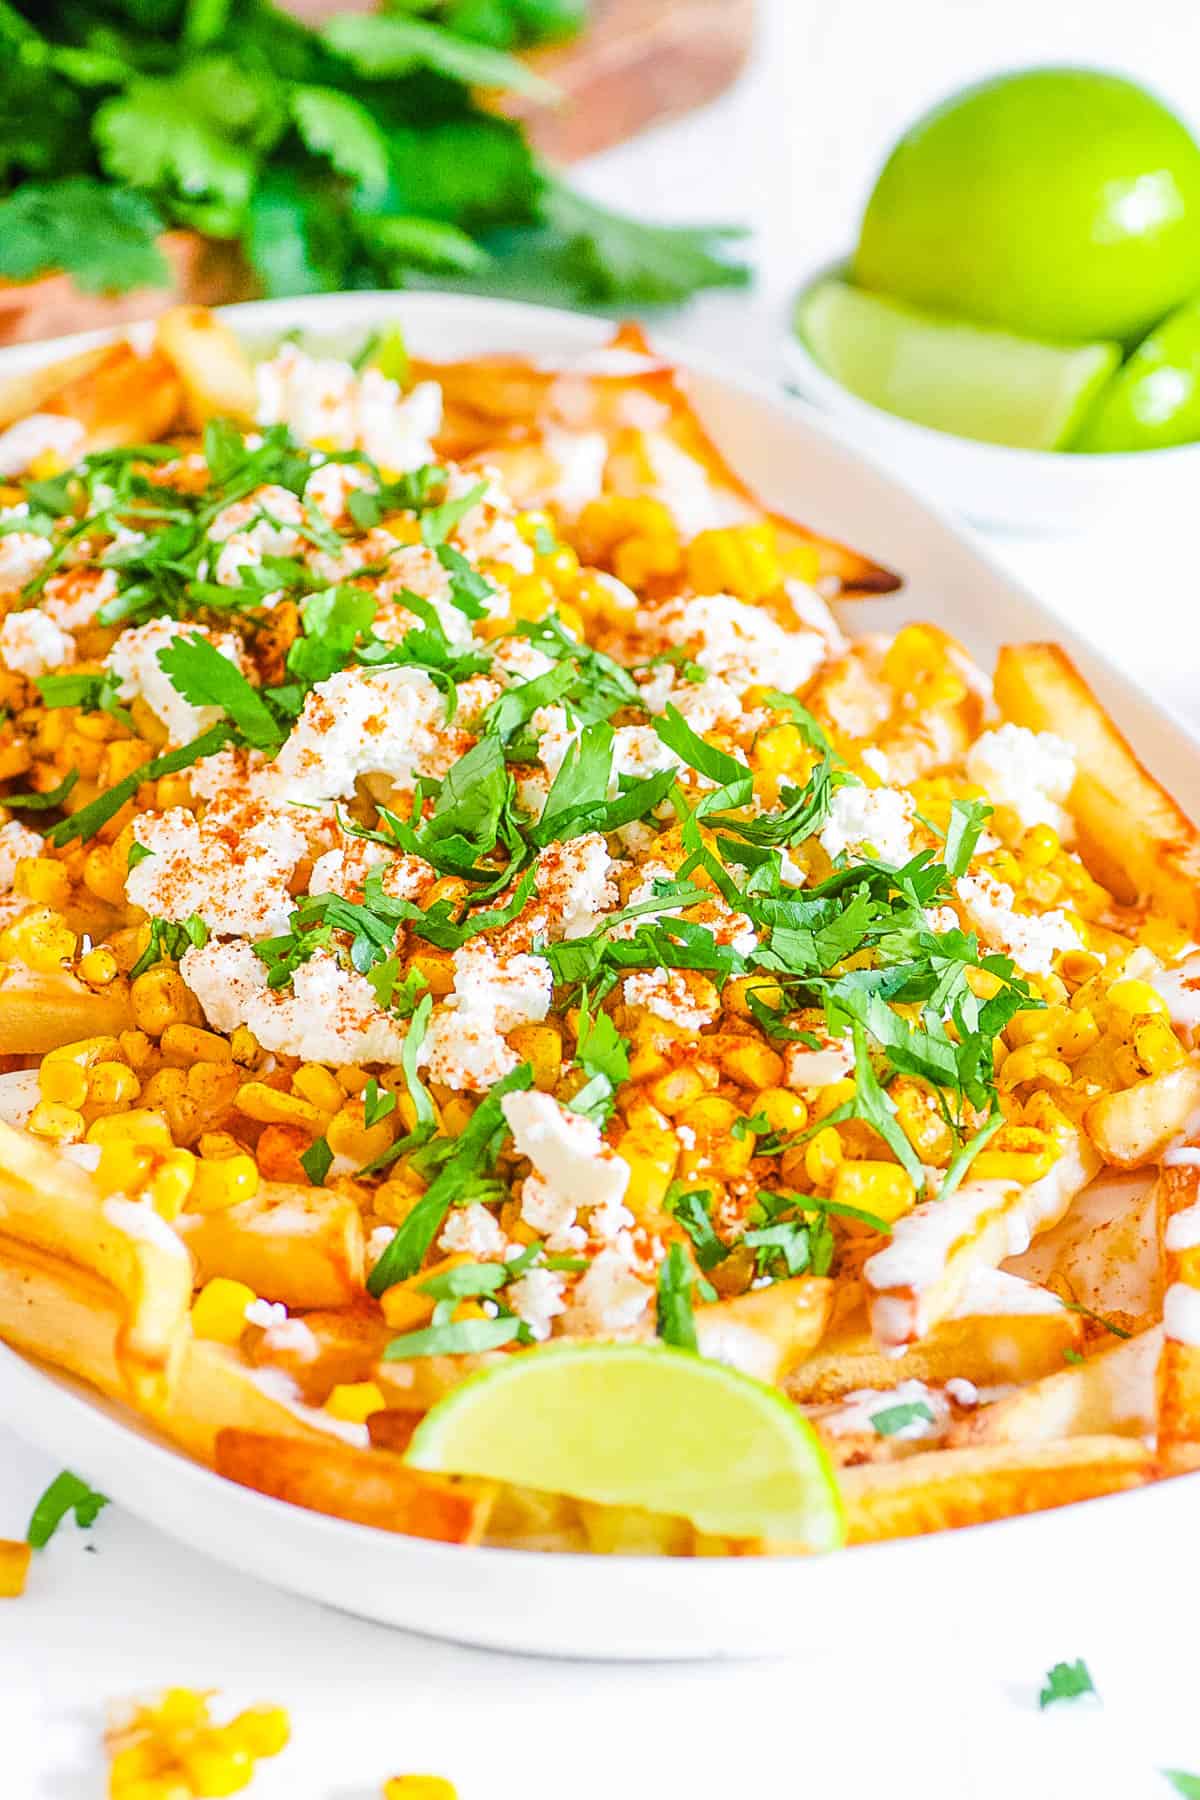 easy vegan gluten free healthy loaded corn fries recipe - mexican corn fries on a white plate.